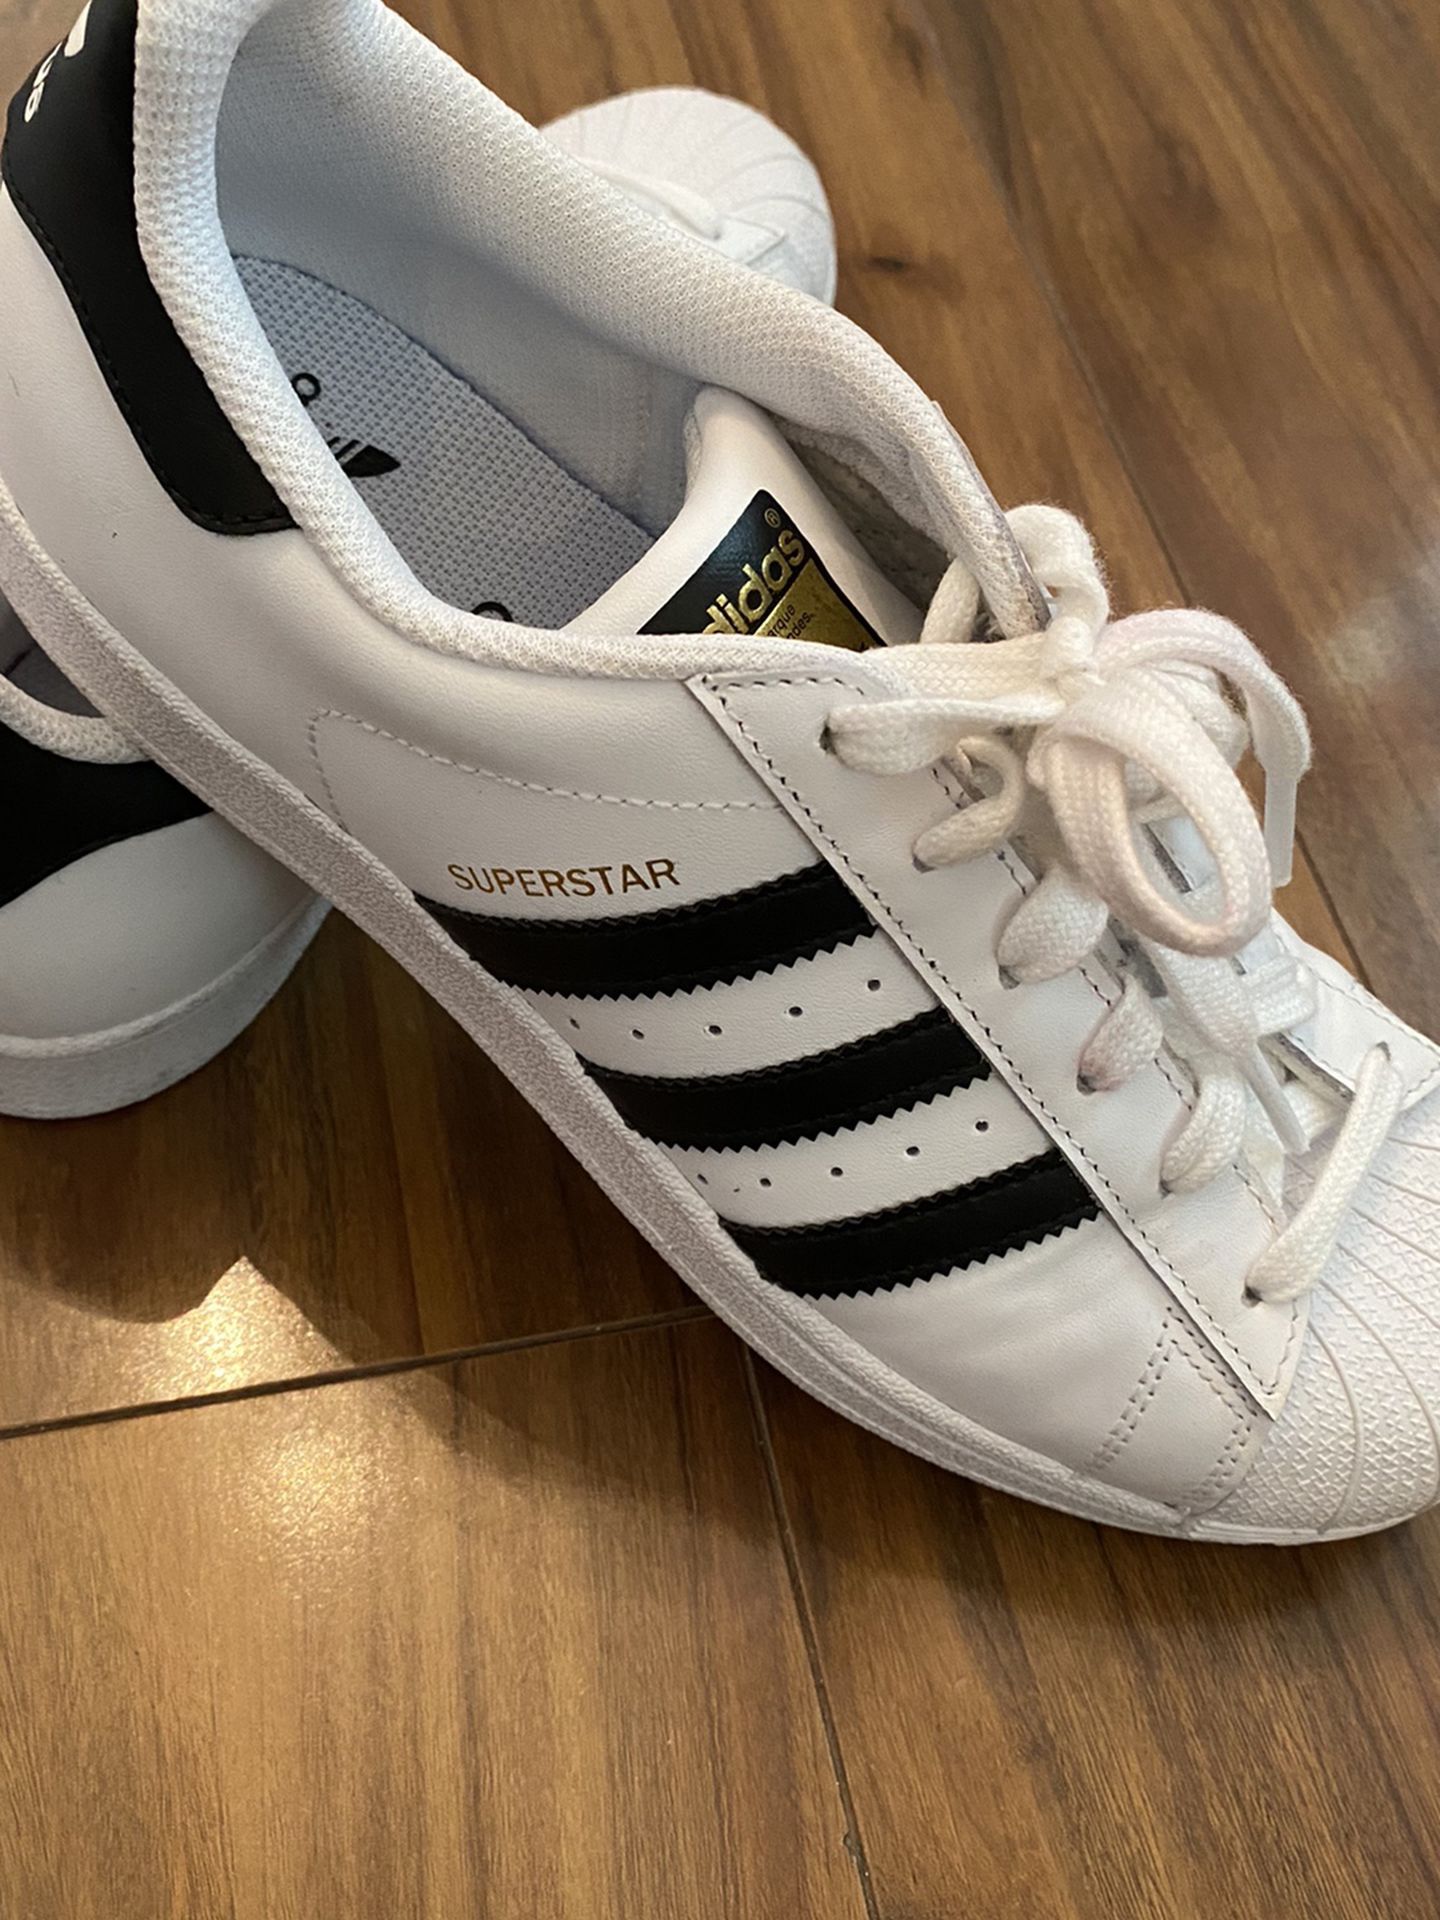 Adidas Superstar Sneakers Size 6